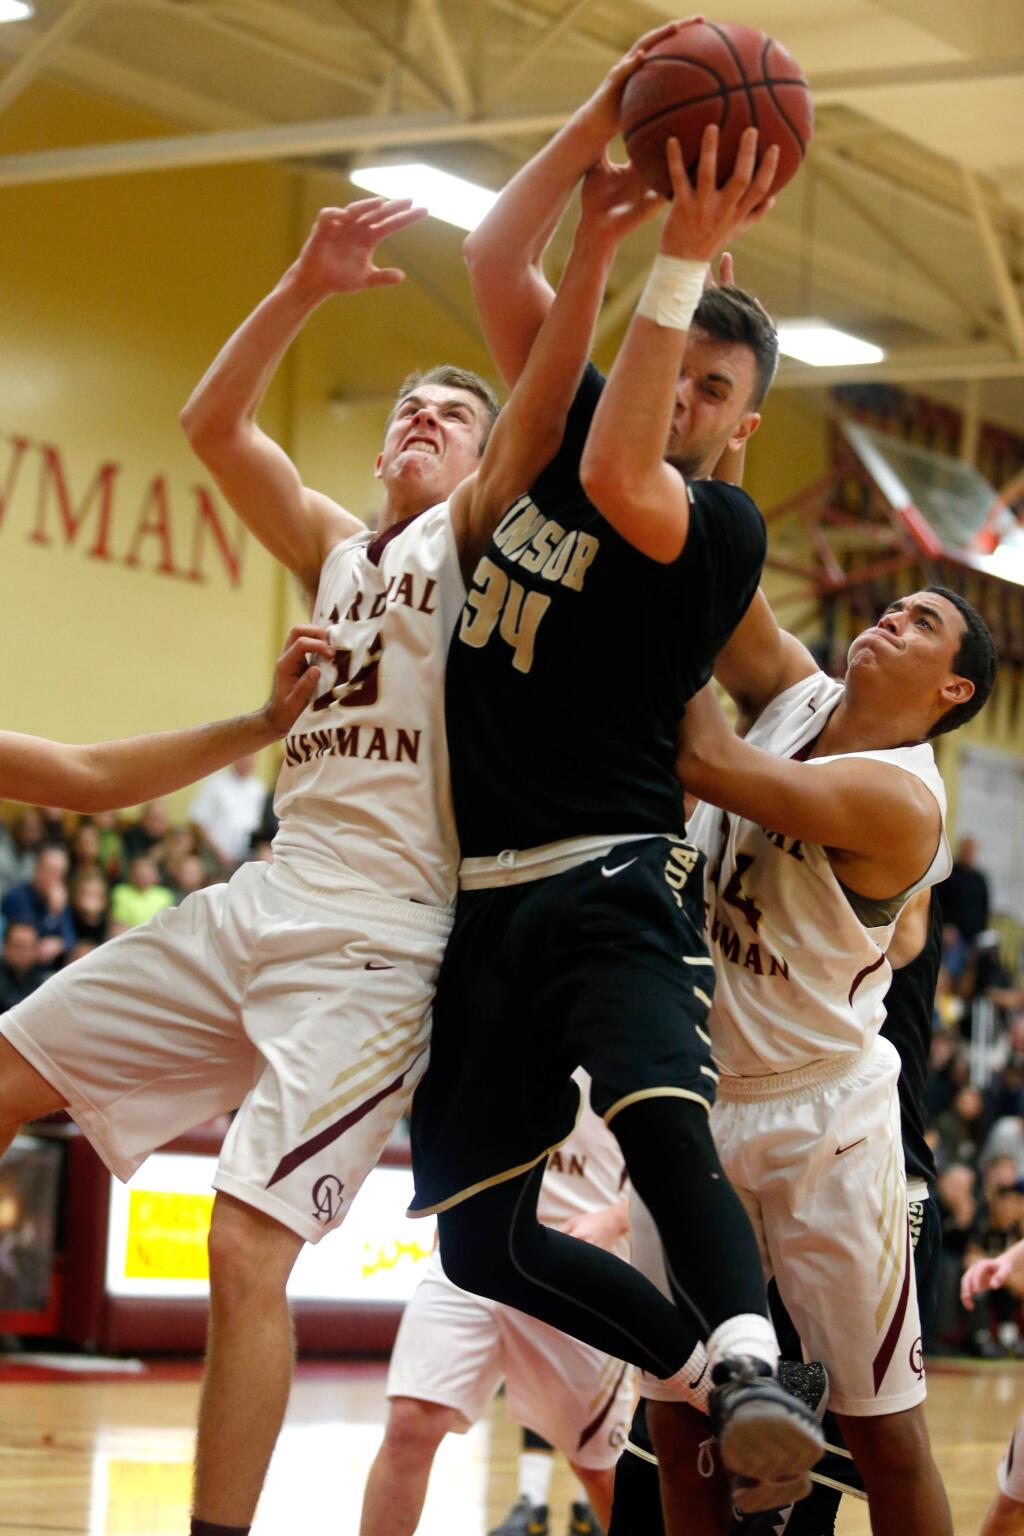 Windsor's Brent Tucker (34) comes down with a rebound between Cardinal Newman's Gavin Dove (15), left, and Jalen Dural (34) during the second half of a boys varsity basketball game between Windsor and Cardinal Newman high schools, in Santa Rosa, California, on Wednesday, January 13, 2016. (Alvin Jornada / The Press Democrat)